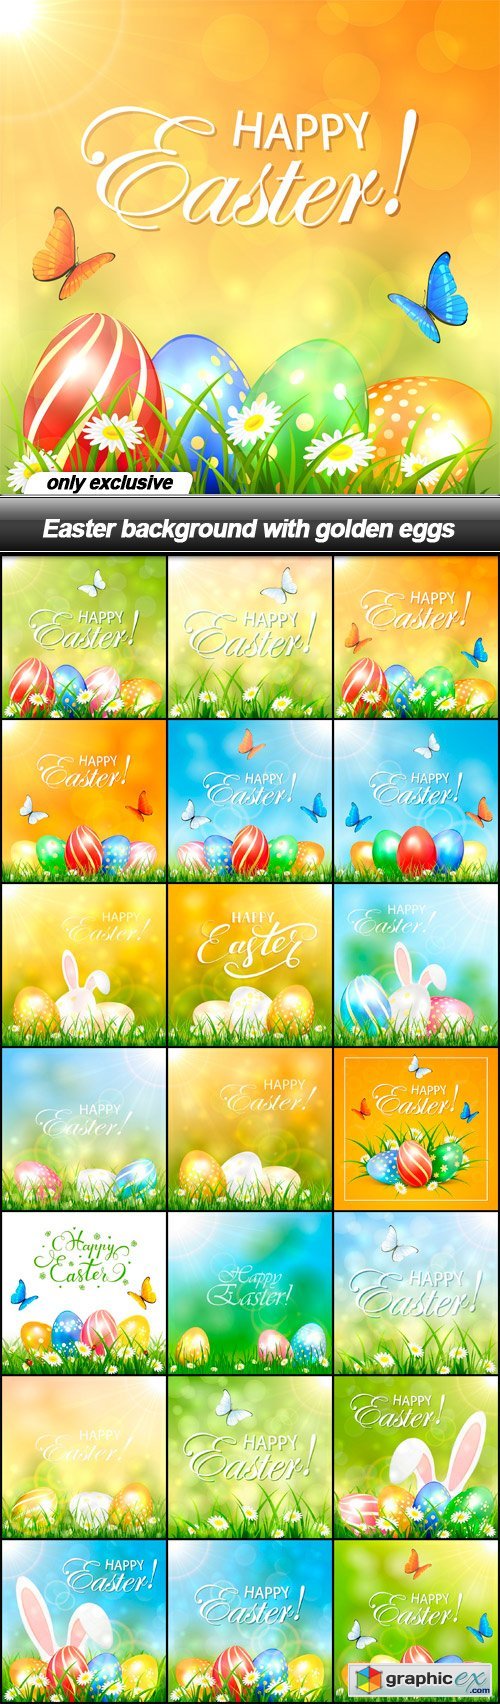 Easter background with golden eggs - 21 EPS